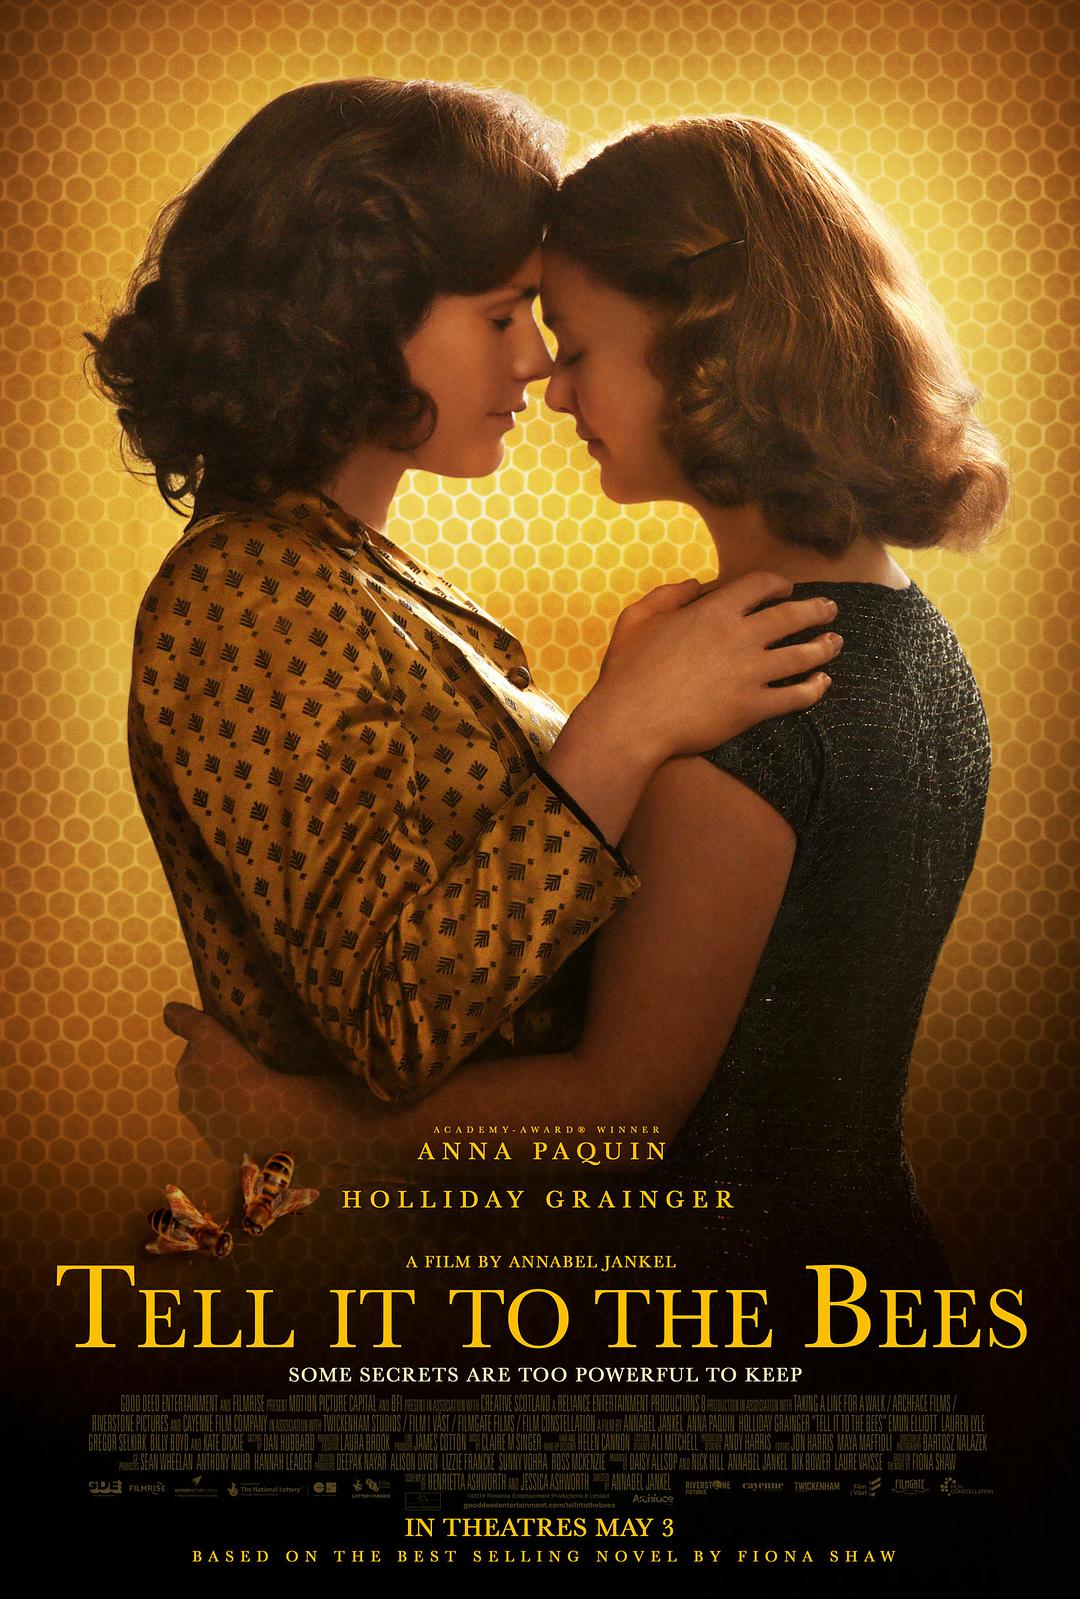 ۷/? Tell.It.to.the.Bees.2018.1080p.BluRay.x264-GETiT 7.94GB-1.png